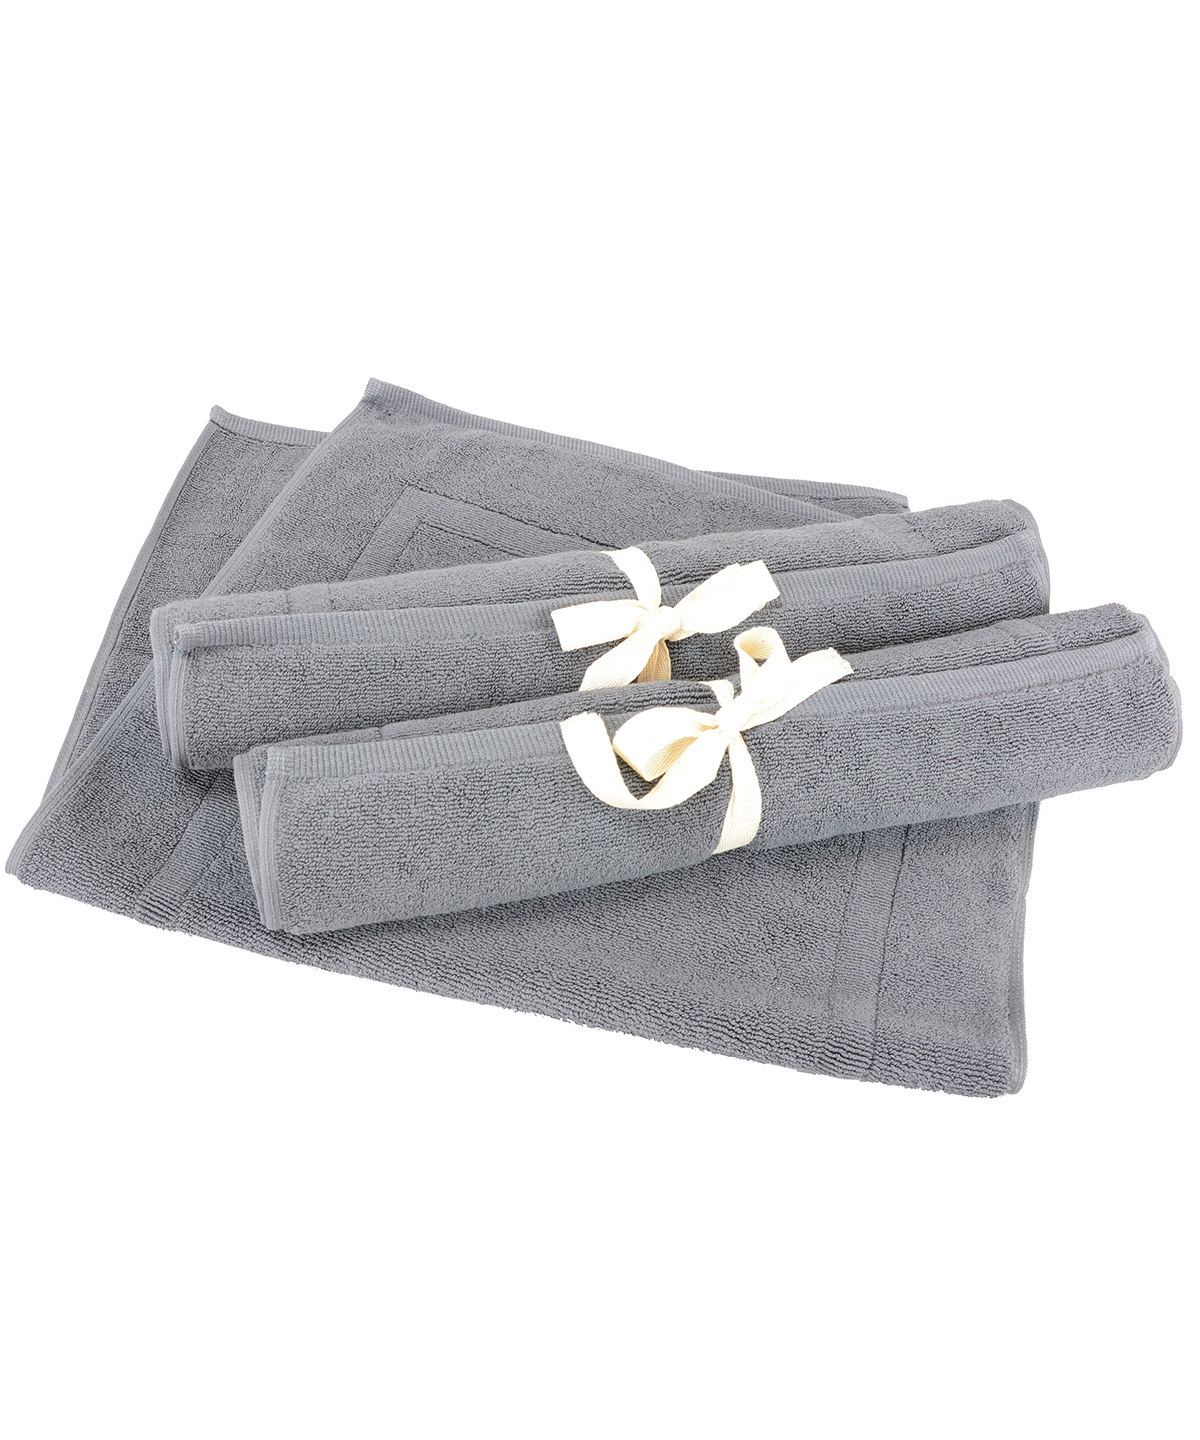 Bath Mat Anthracite Grey Size One Size